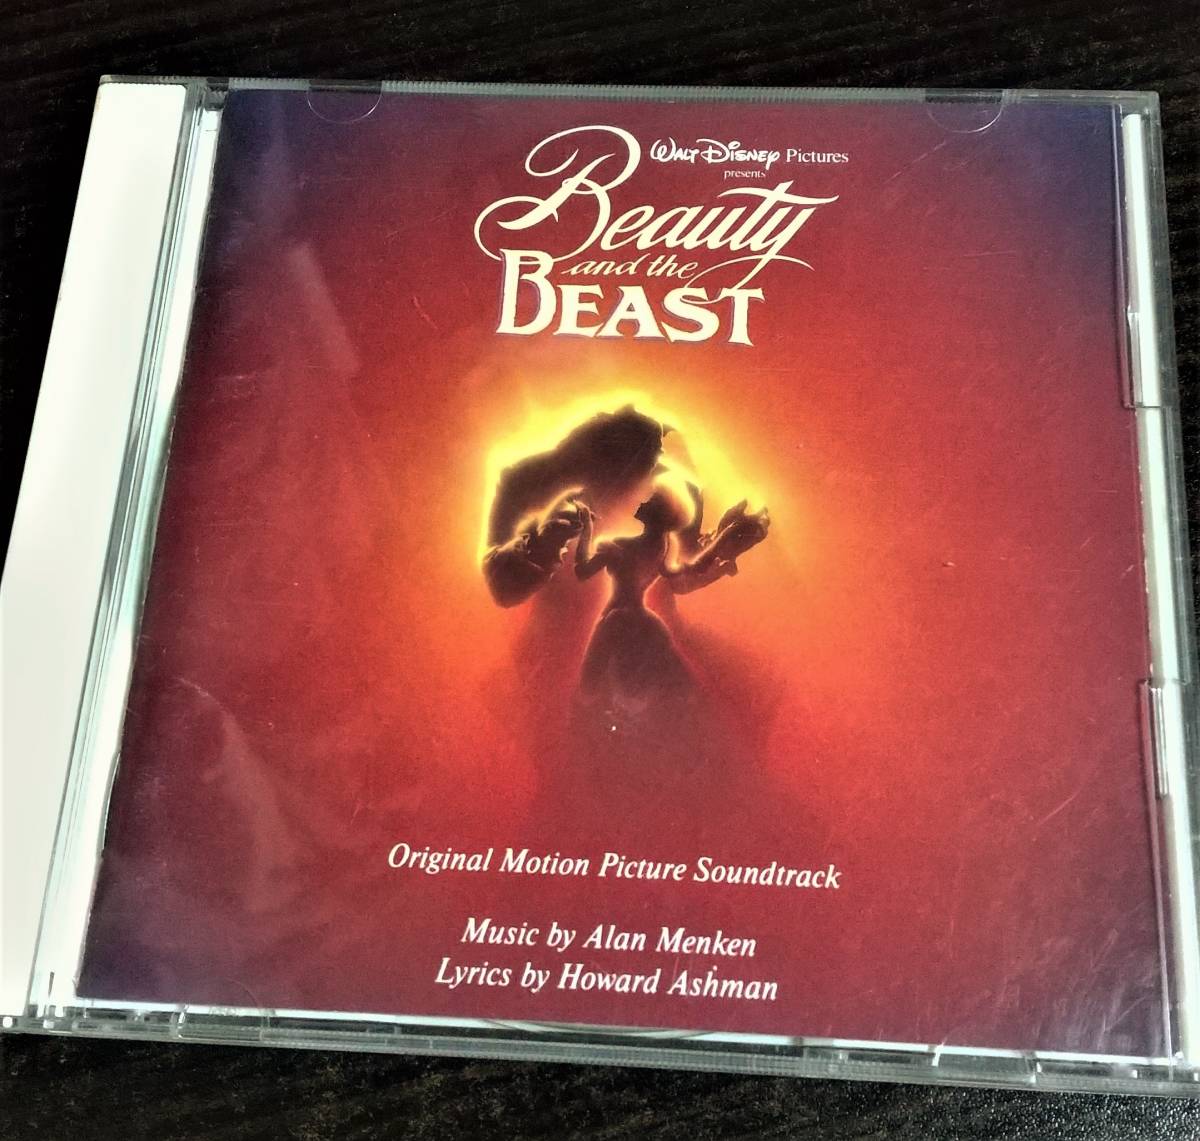  Beauty and the Beast Disney Beauty and the Beast soundtrack English poetry / Japanese translation 1991 year domestic record free shipping 